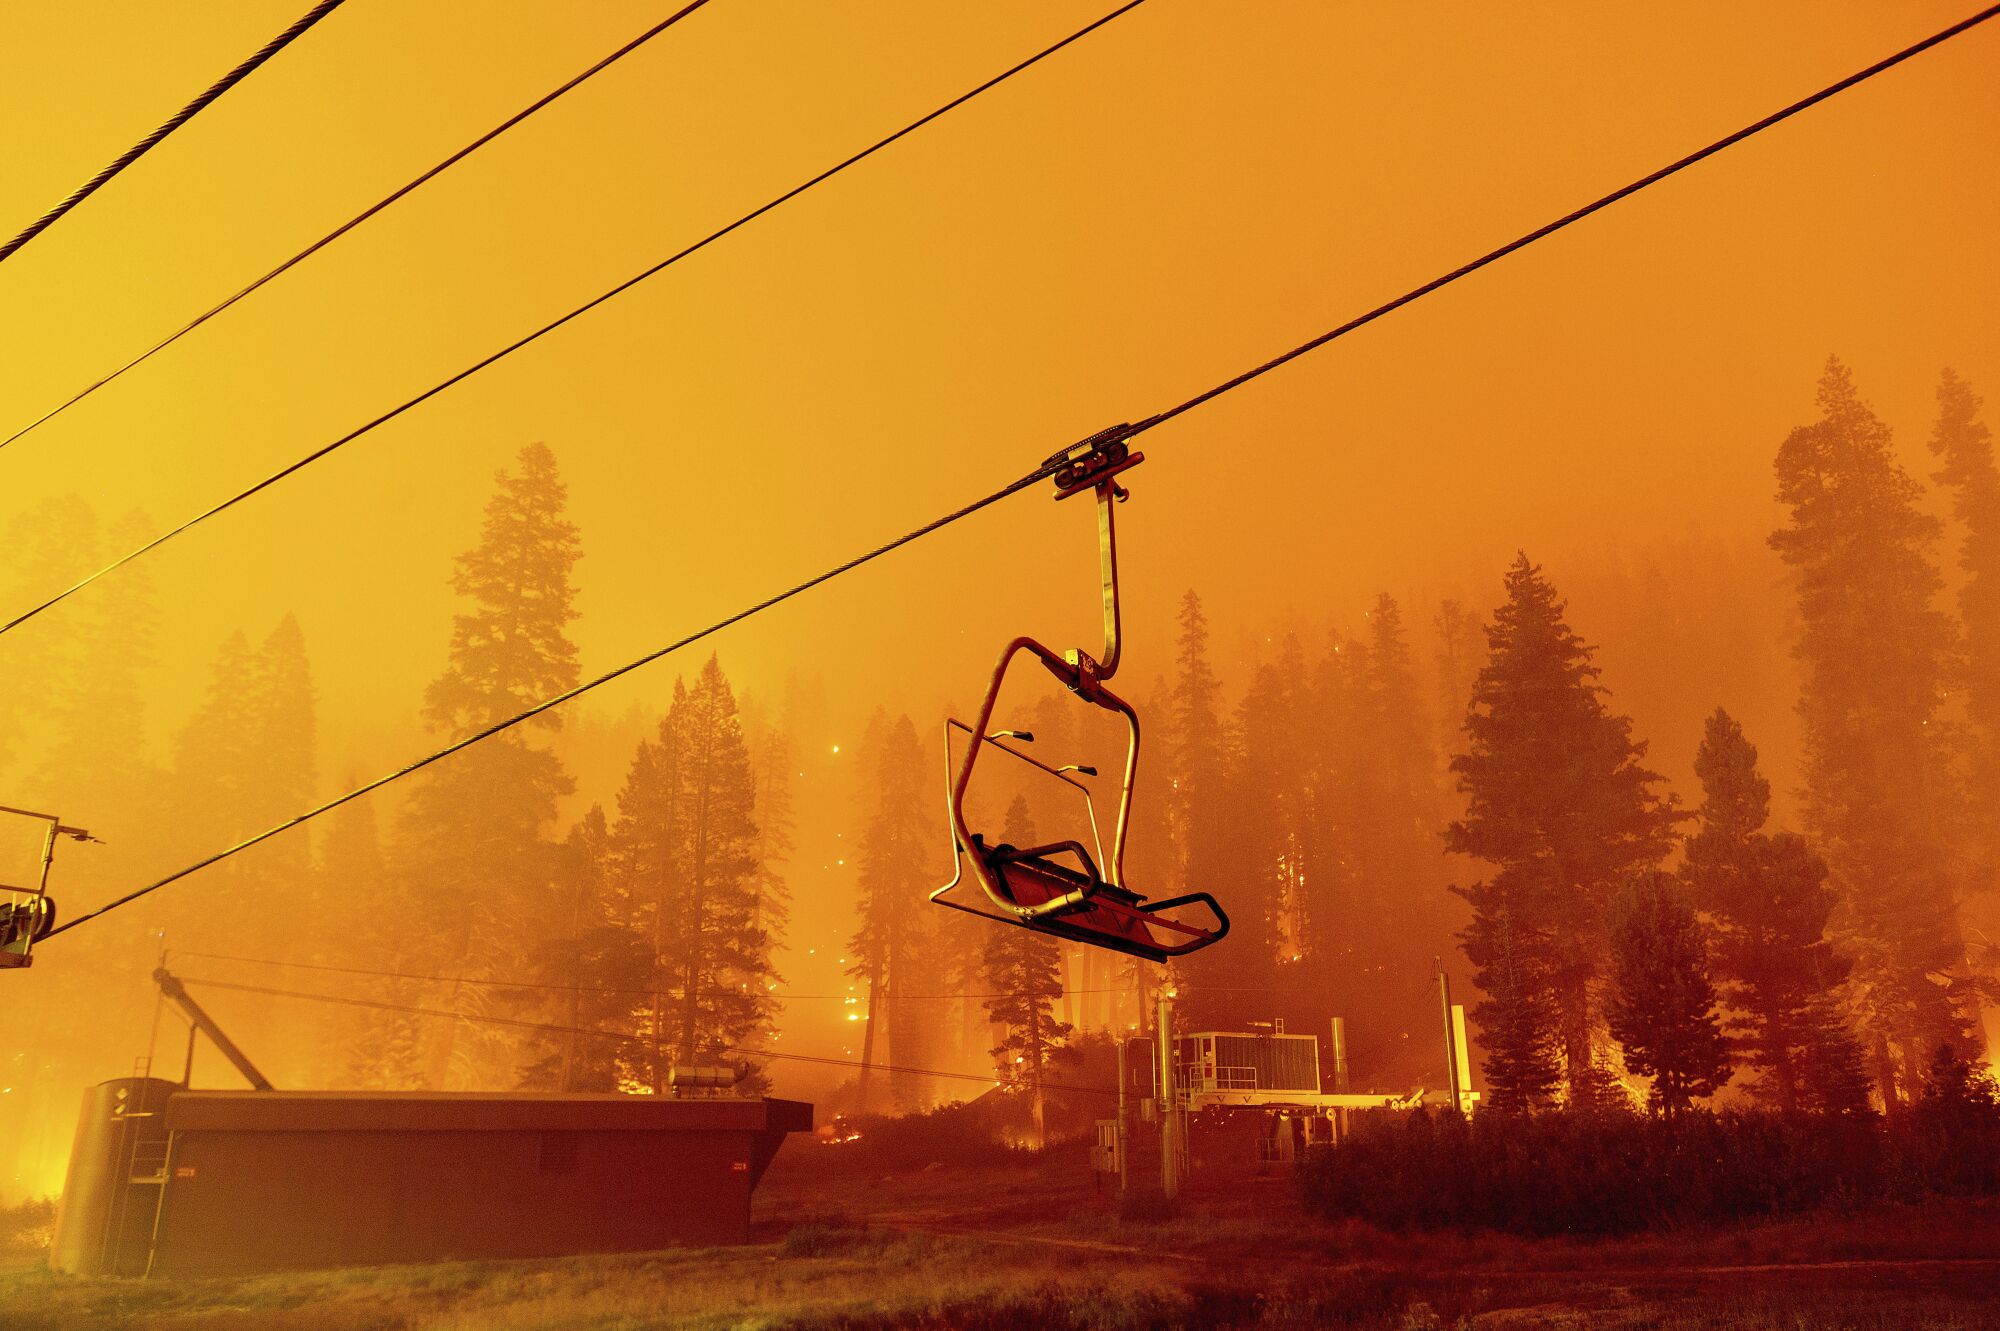 An empty chair lift against a backdrop of trees, flames and smoke.